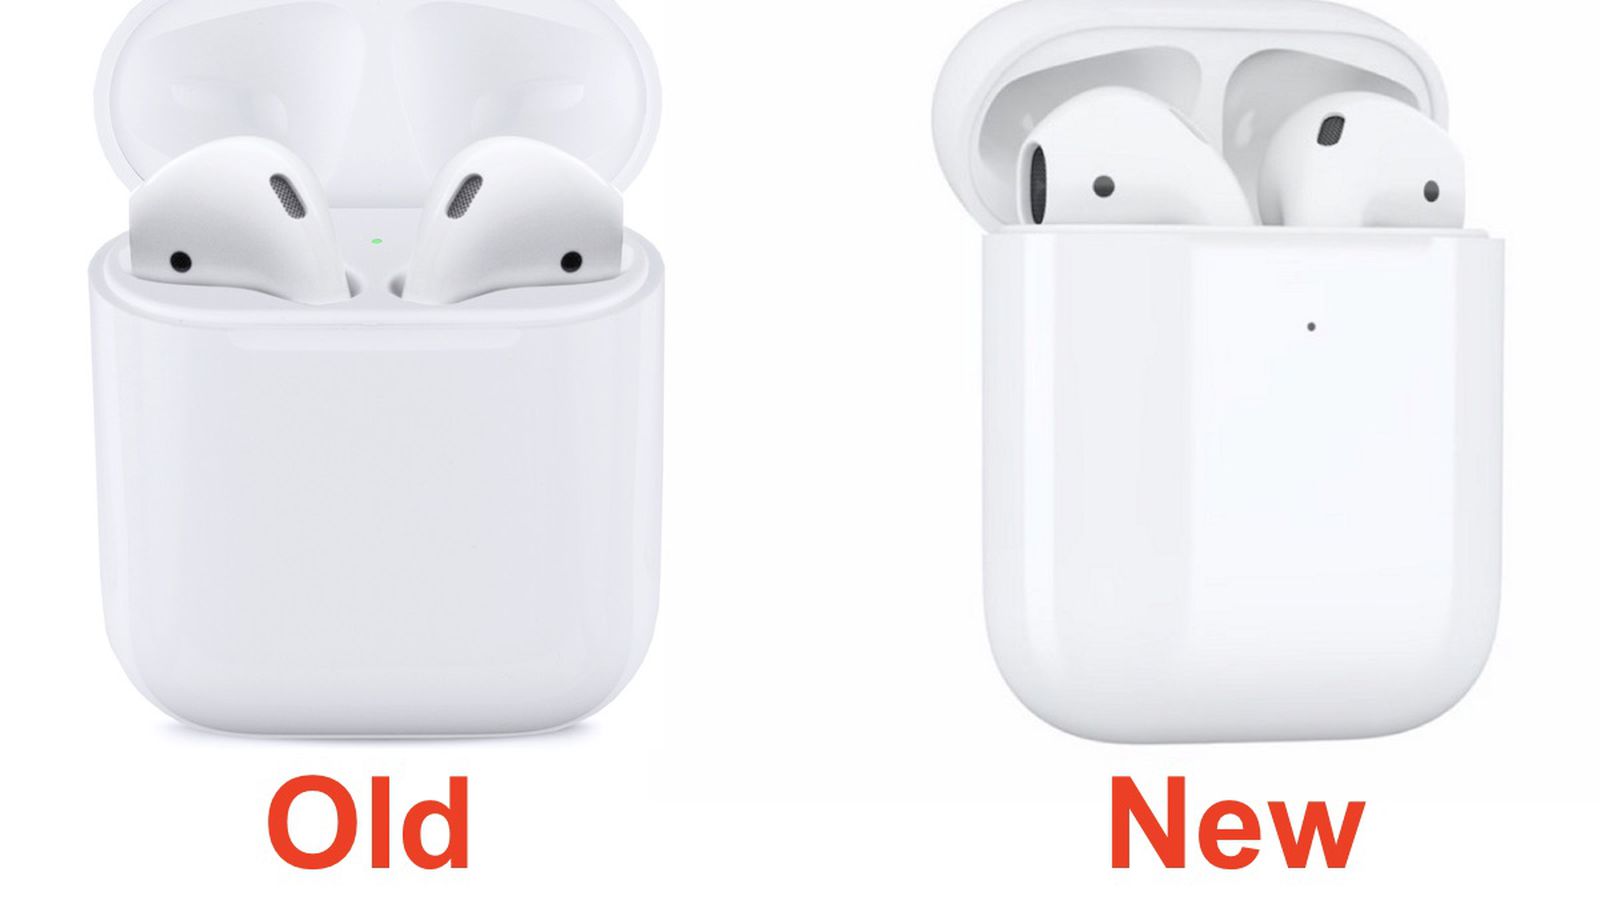 Here's First Look at the New Version Apple's AirPods - MacRumors